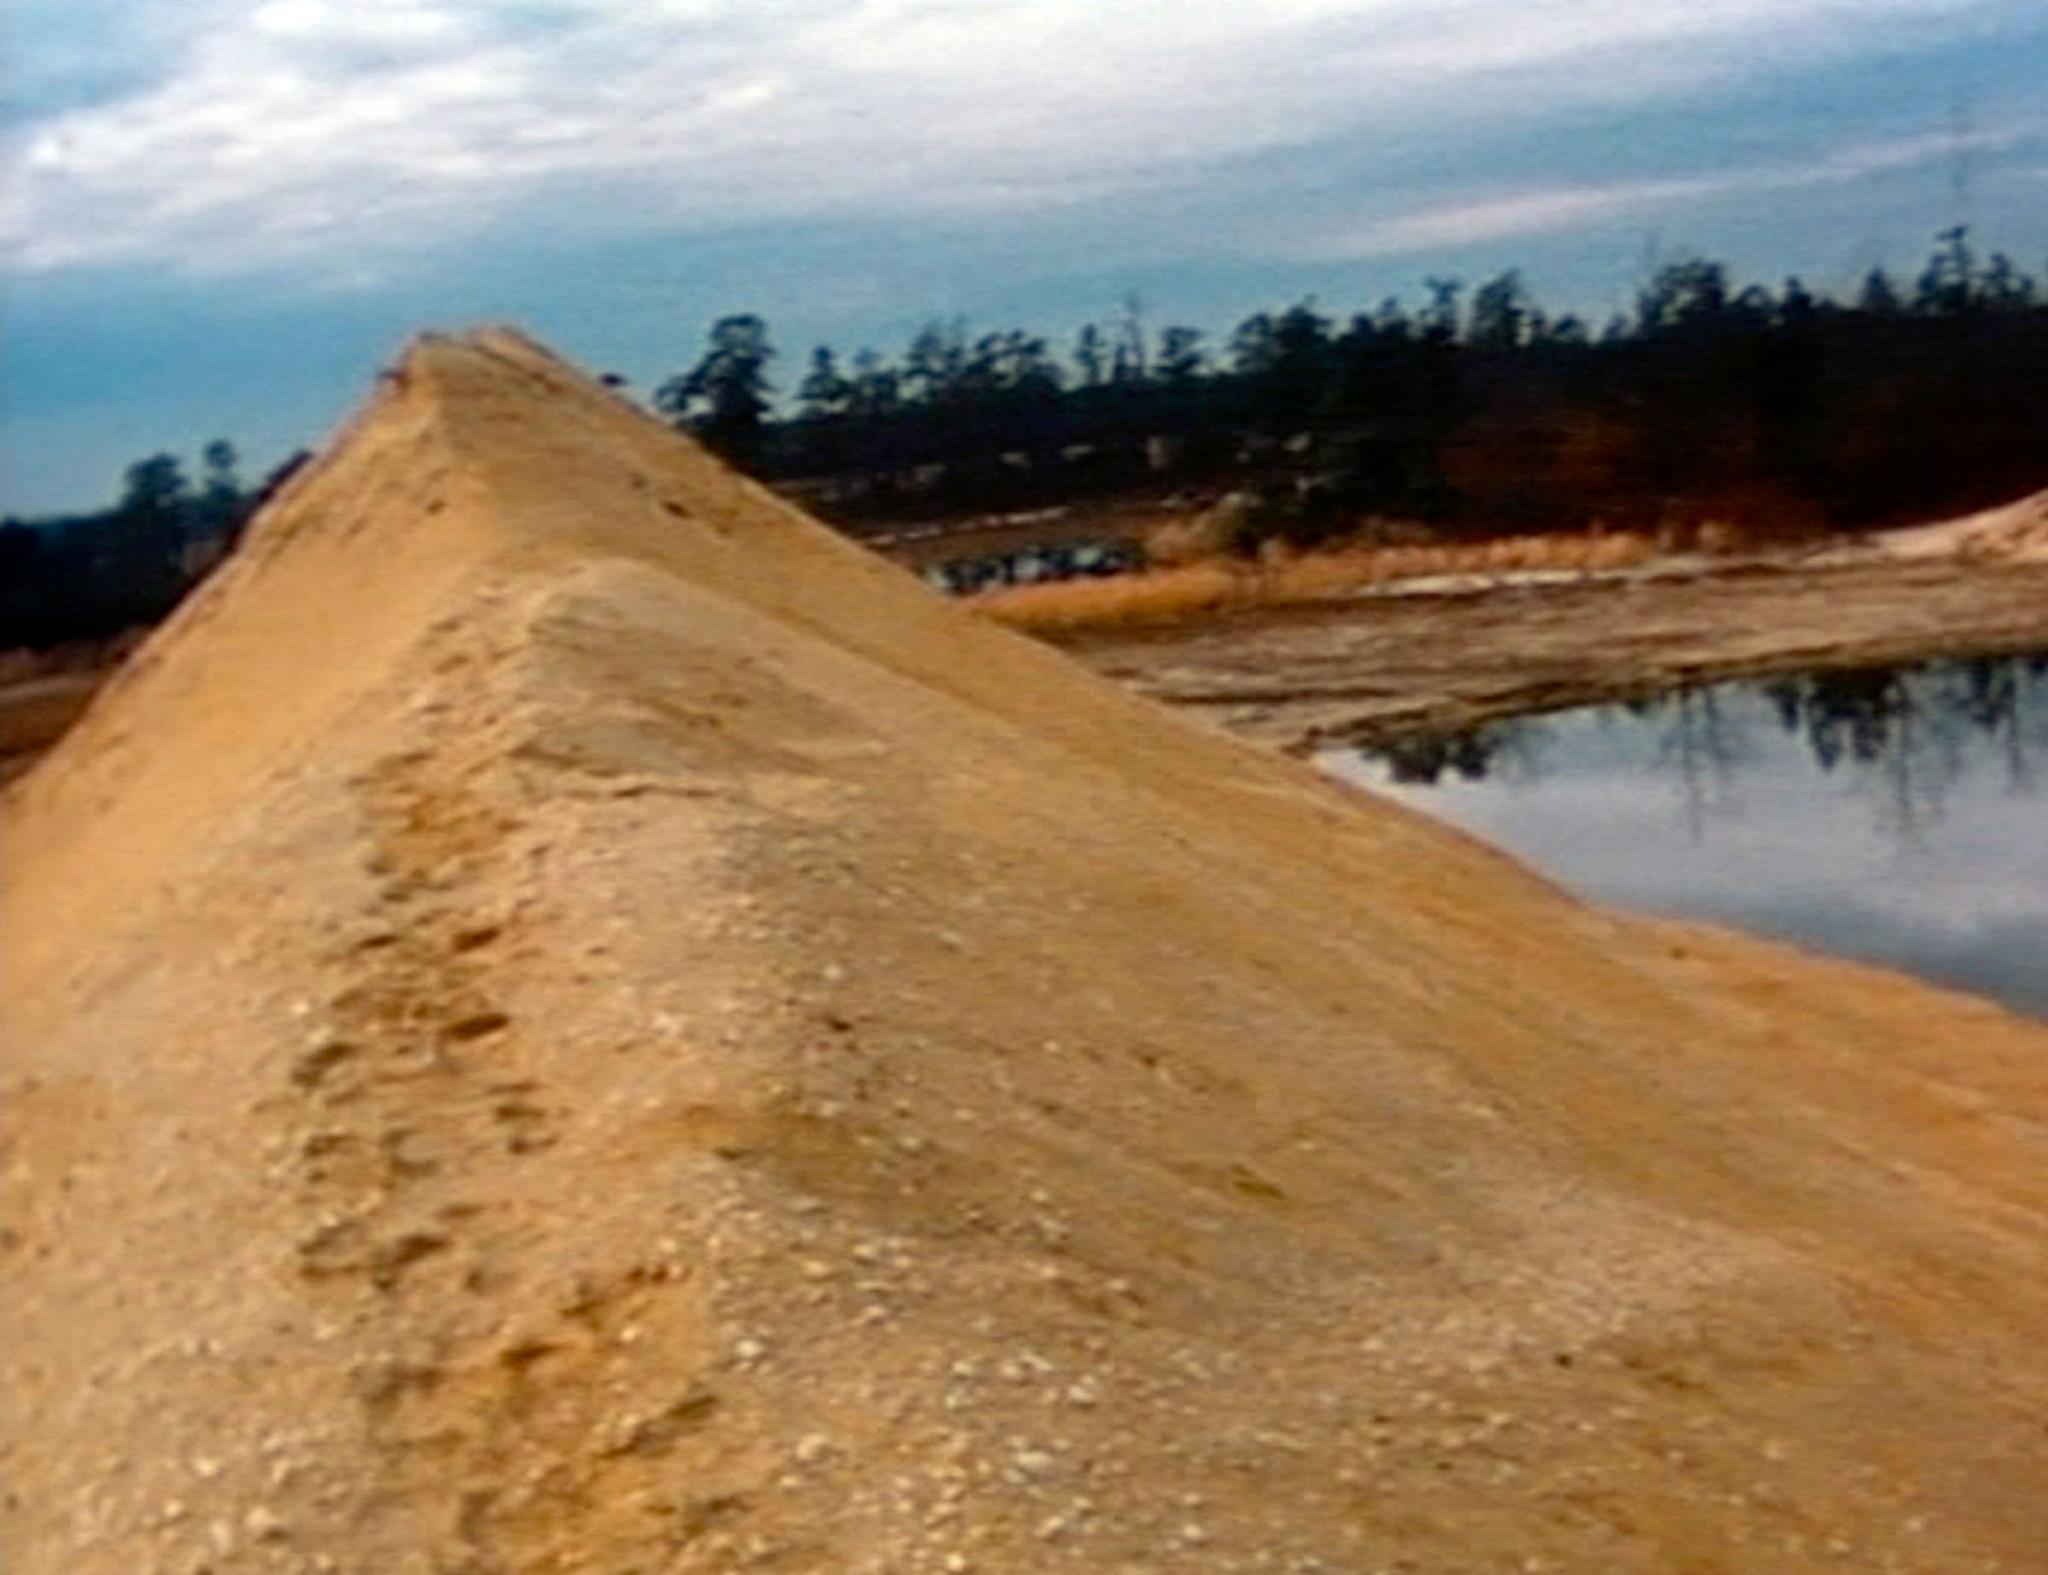 A still image of a mound of earth in Pine Barrens, New Jersey.